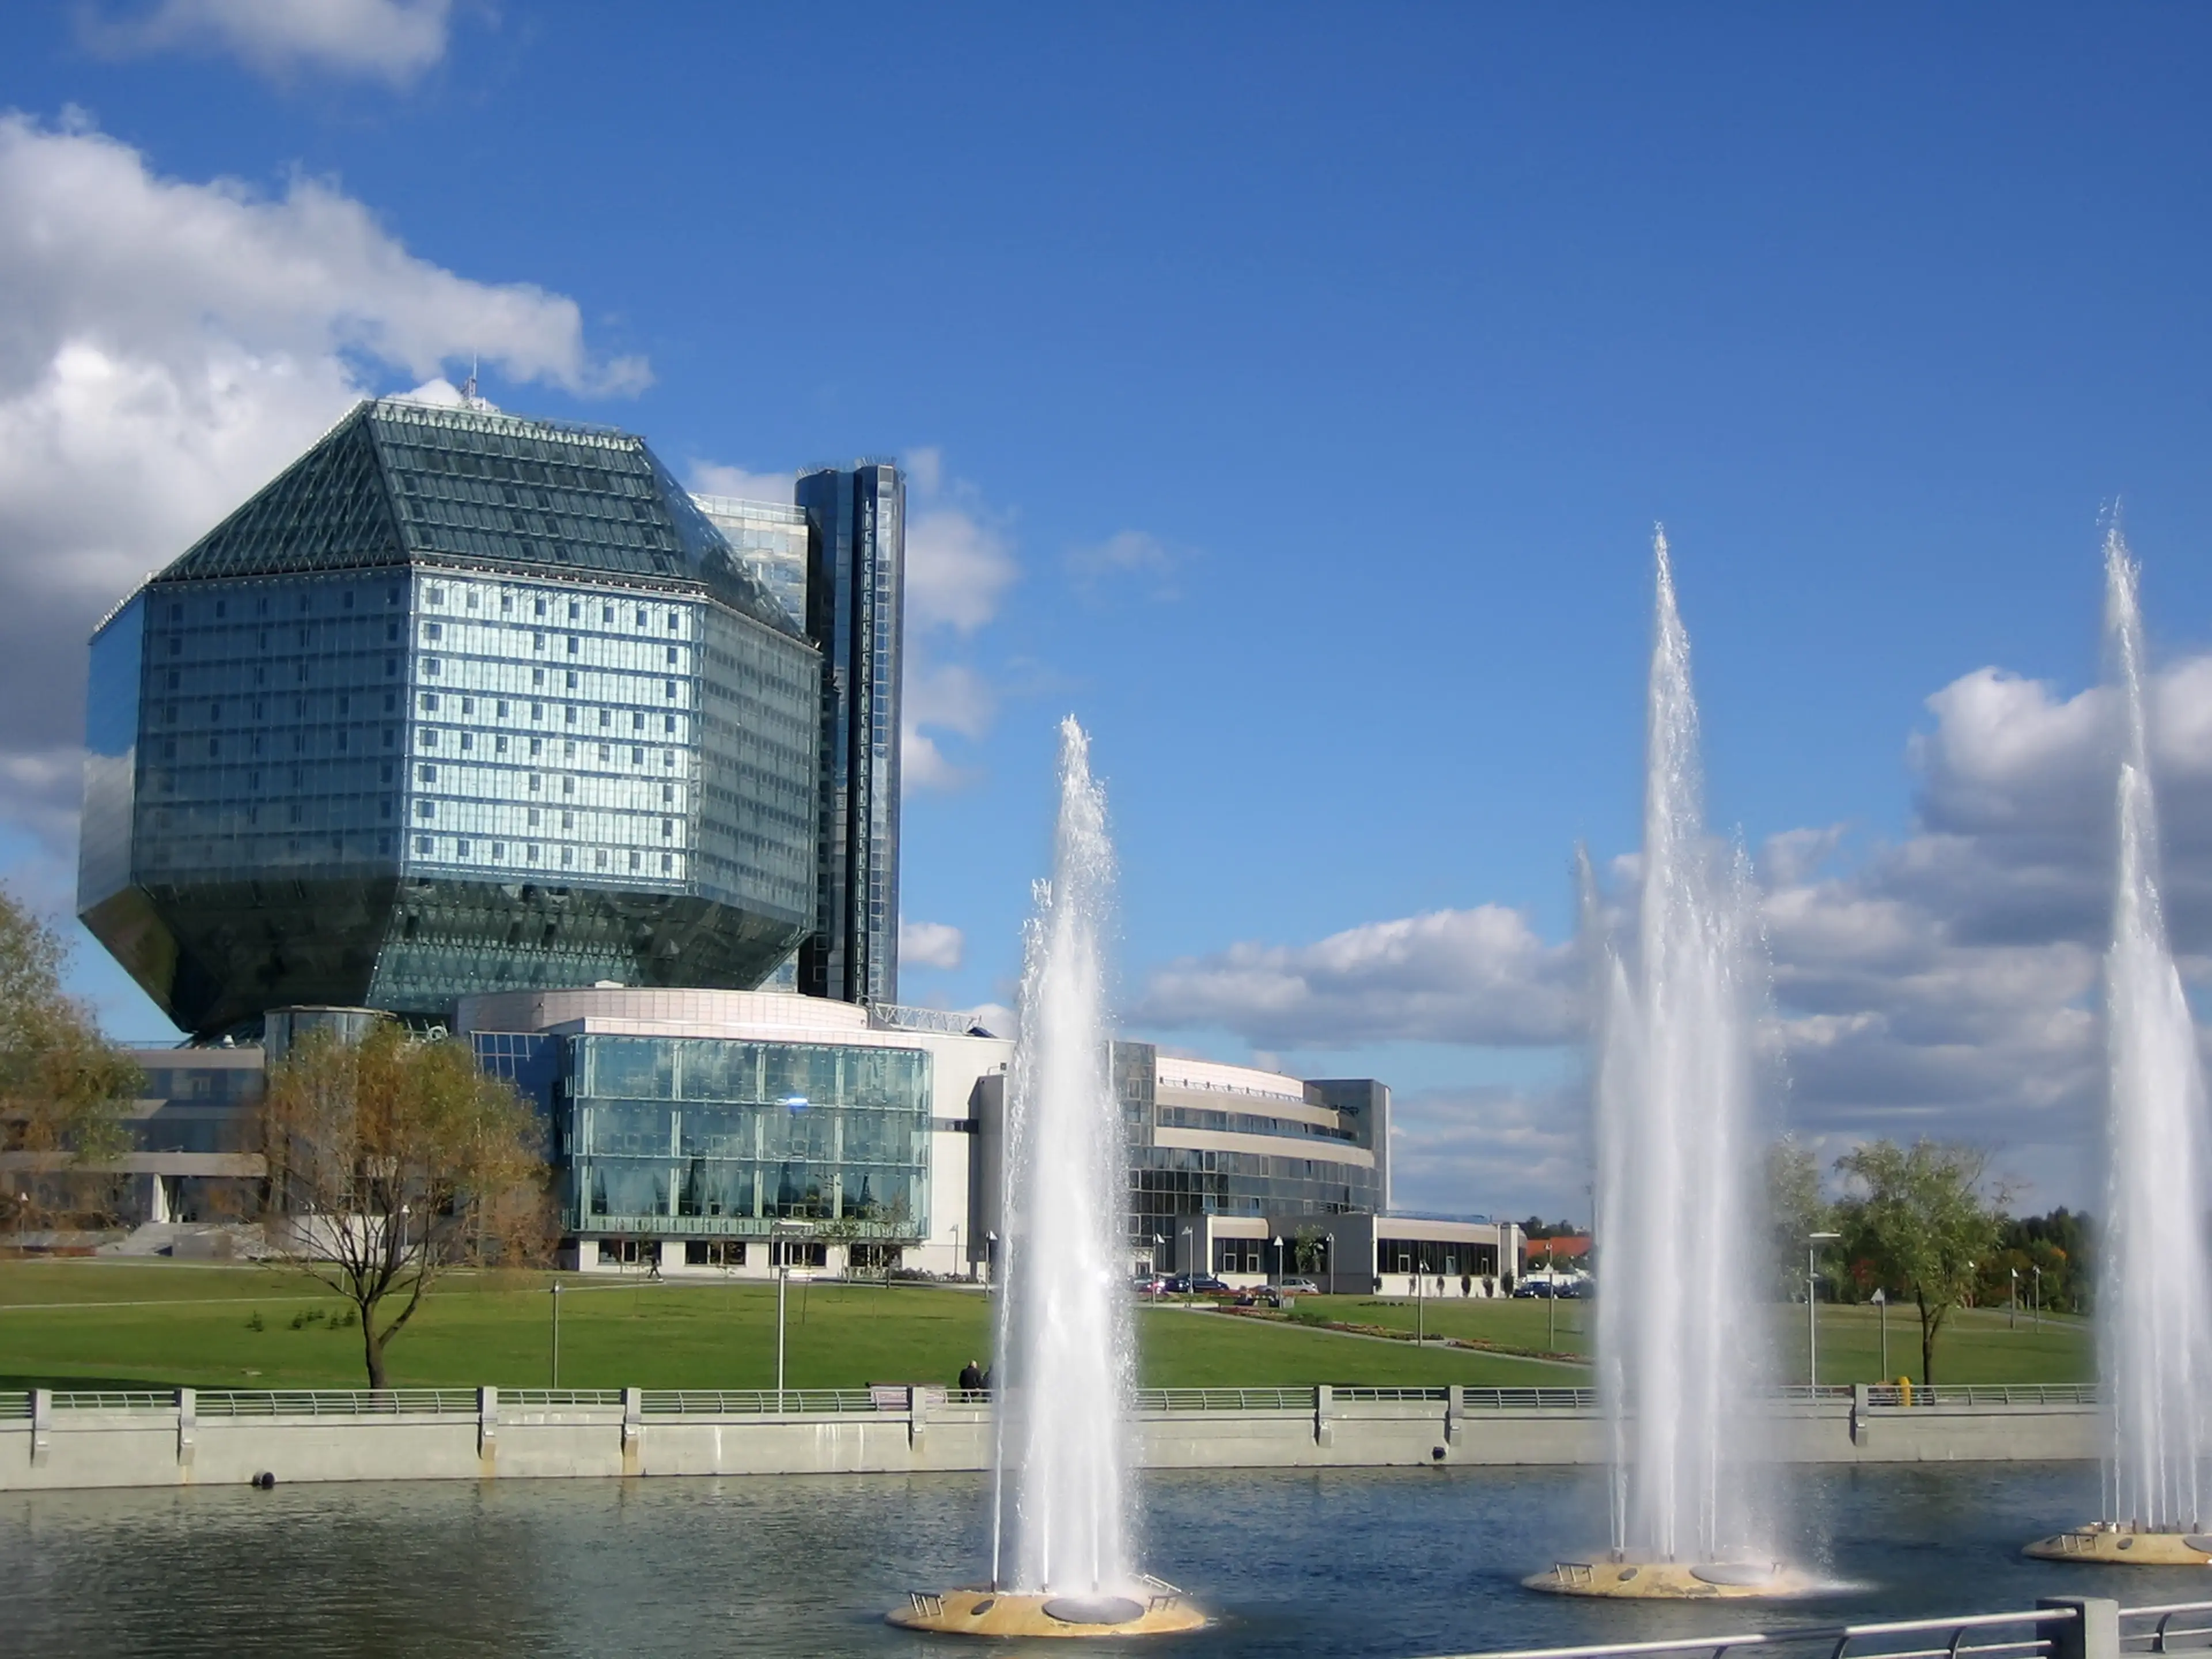 National library of Belarus with fountains